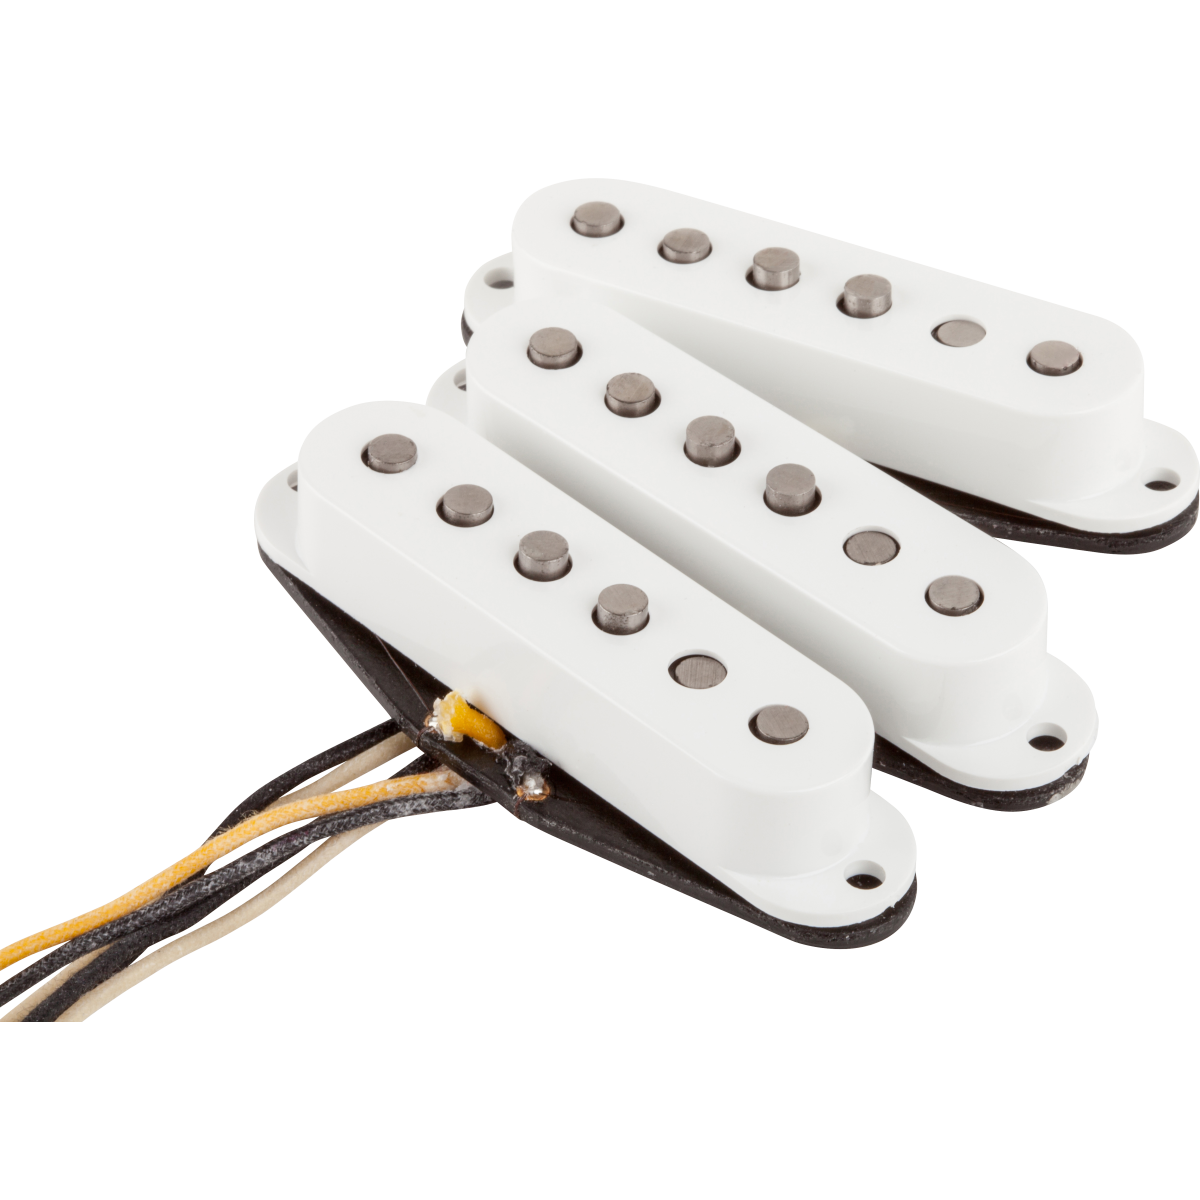 Fender Texas Special Pickups - Set of 3 in White